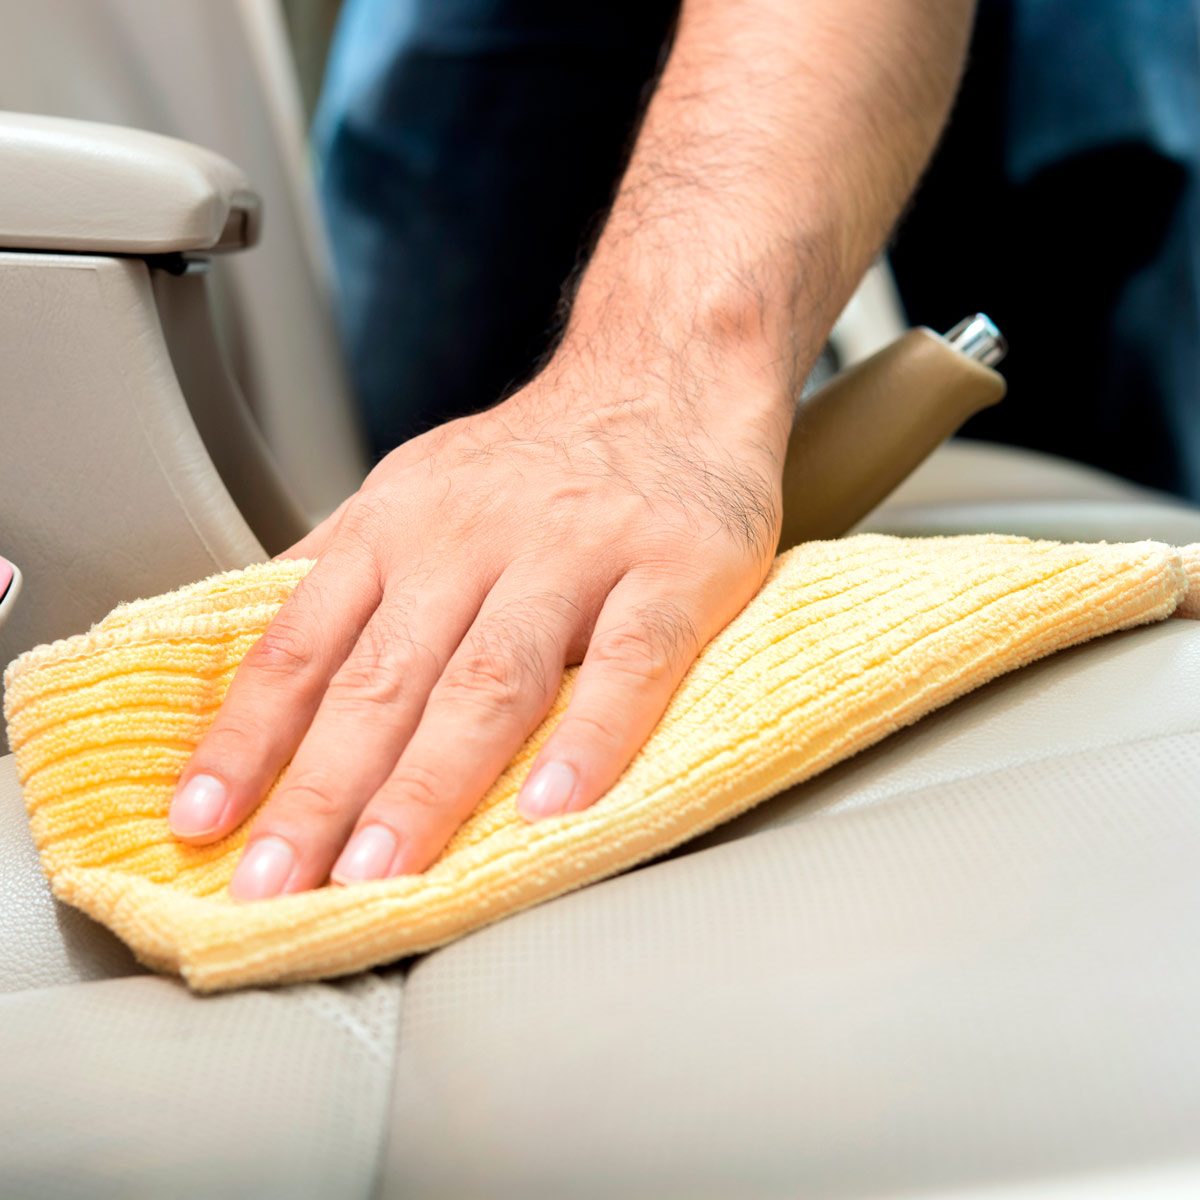 How to Remove Stains from Car Seats: Quick and Easy Guide By YMF Car Parts